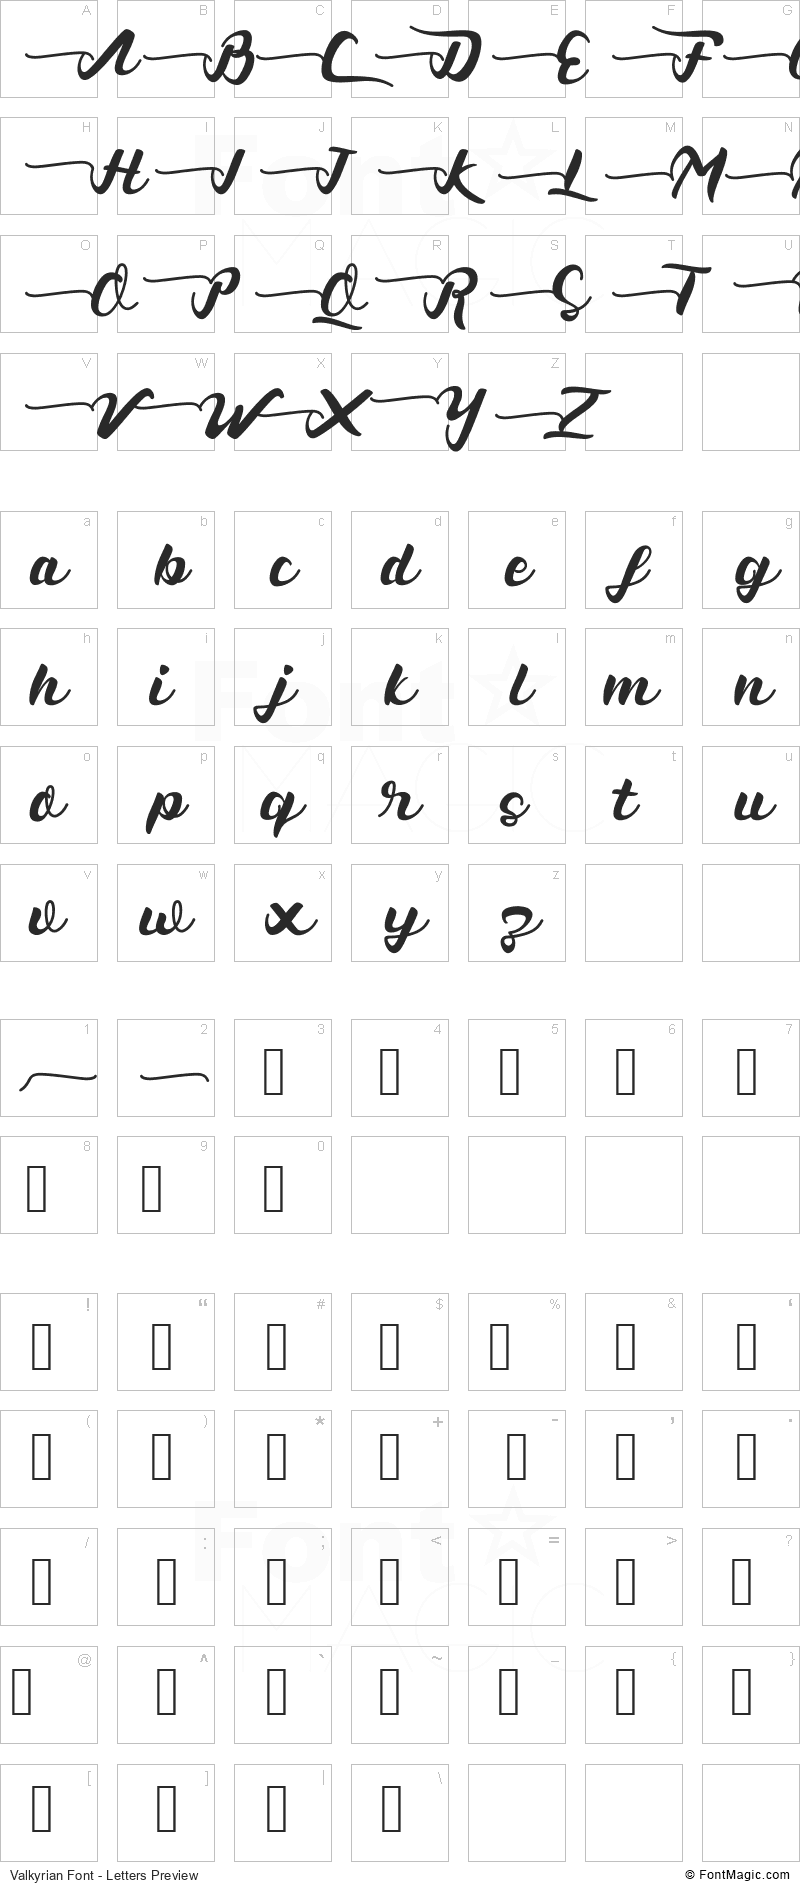 Valkyrian Font - All Latters Preview Chart